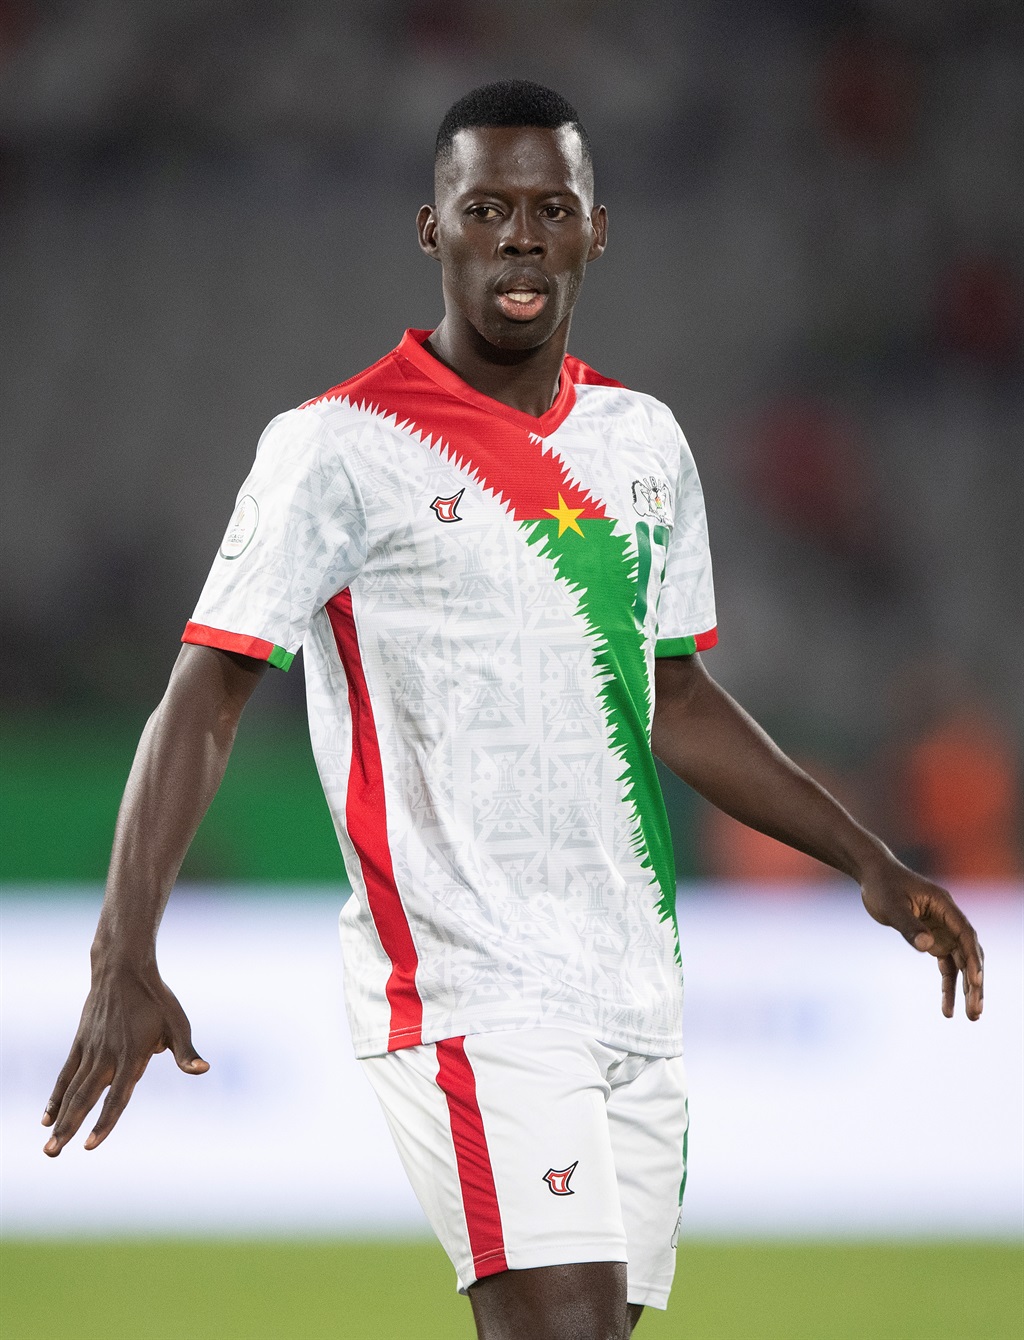 Yamoussoukro, IVORY COAST - JANUARY 23: STÃ?PHANE AZIZ KI of Burkina Faso during the TotalEnergies CAF Africa Cup of Nations group stage match between Angola and Burkina Faso at  on January 23, 2024 in Yamoussoukro, Ivory Coast. (Photo by Visionhaus/Getty Images)